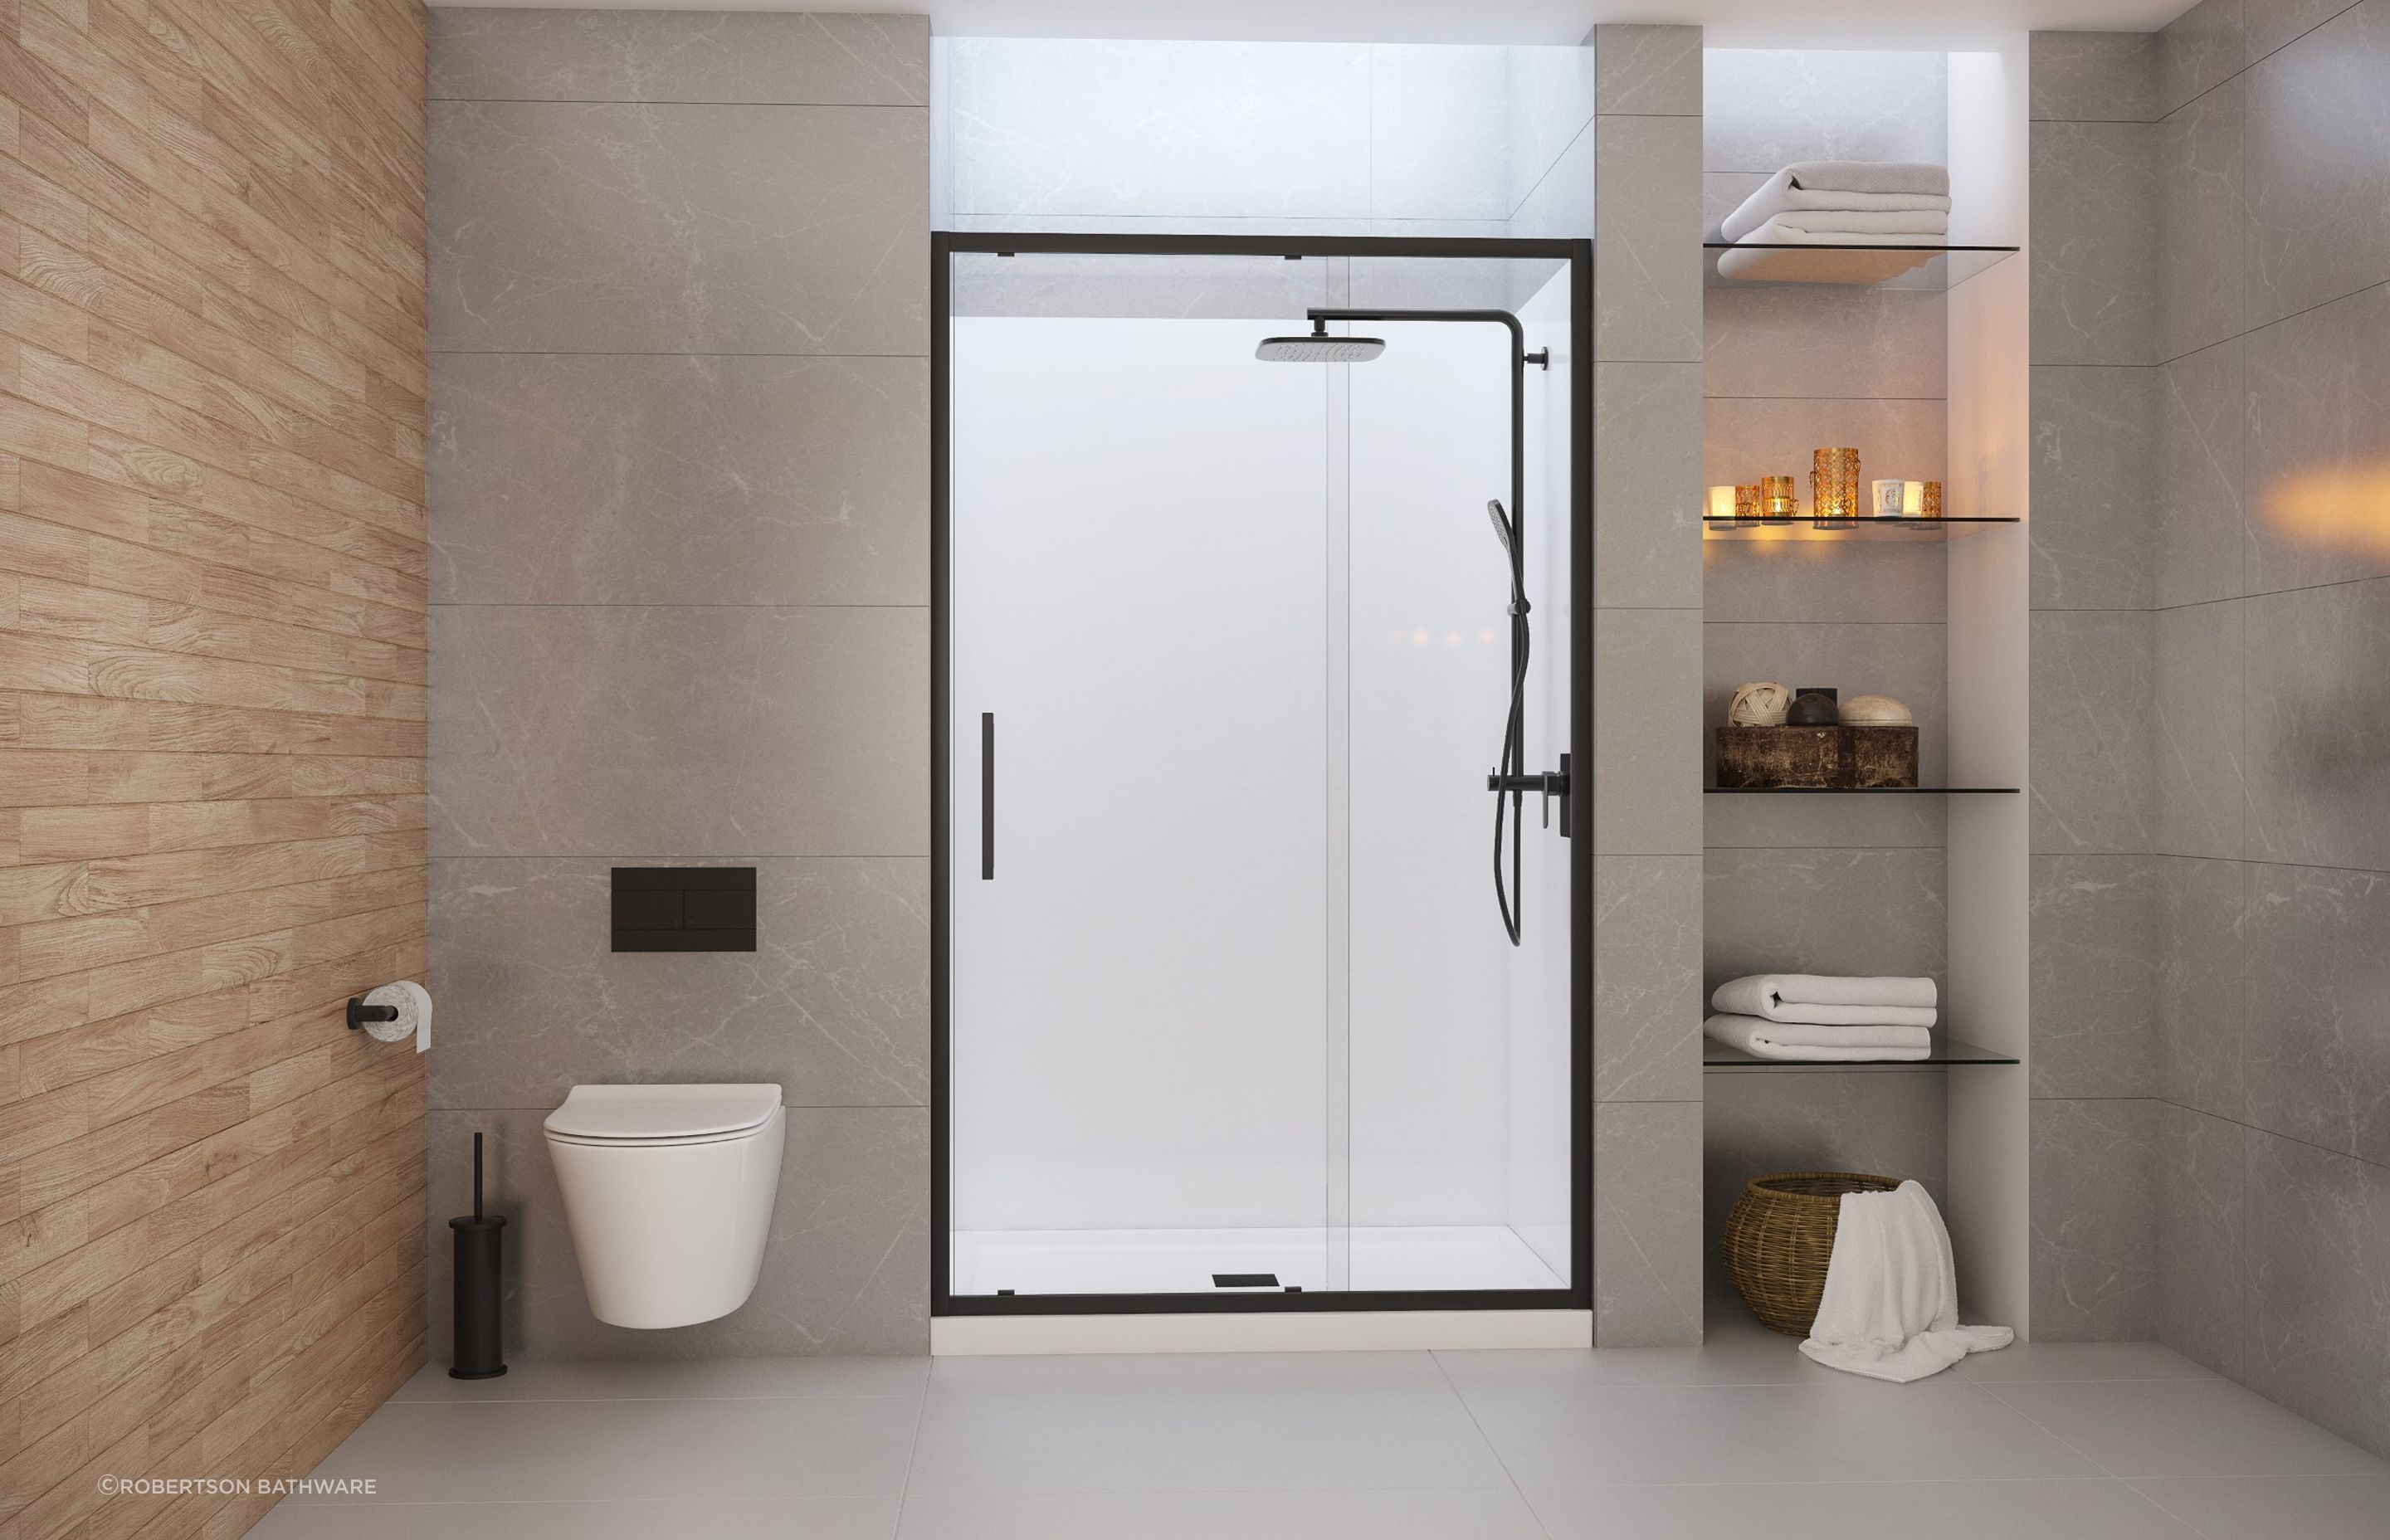 The Elementi Evolve Showers feature safety glass tested to the AS NZS 2208 standard and a 5mm safety lip to help prevent leakage.